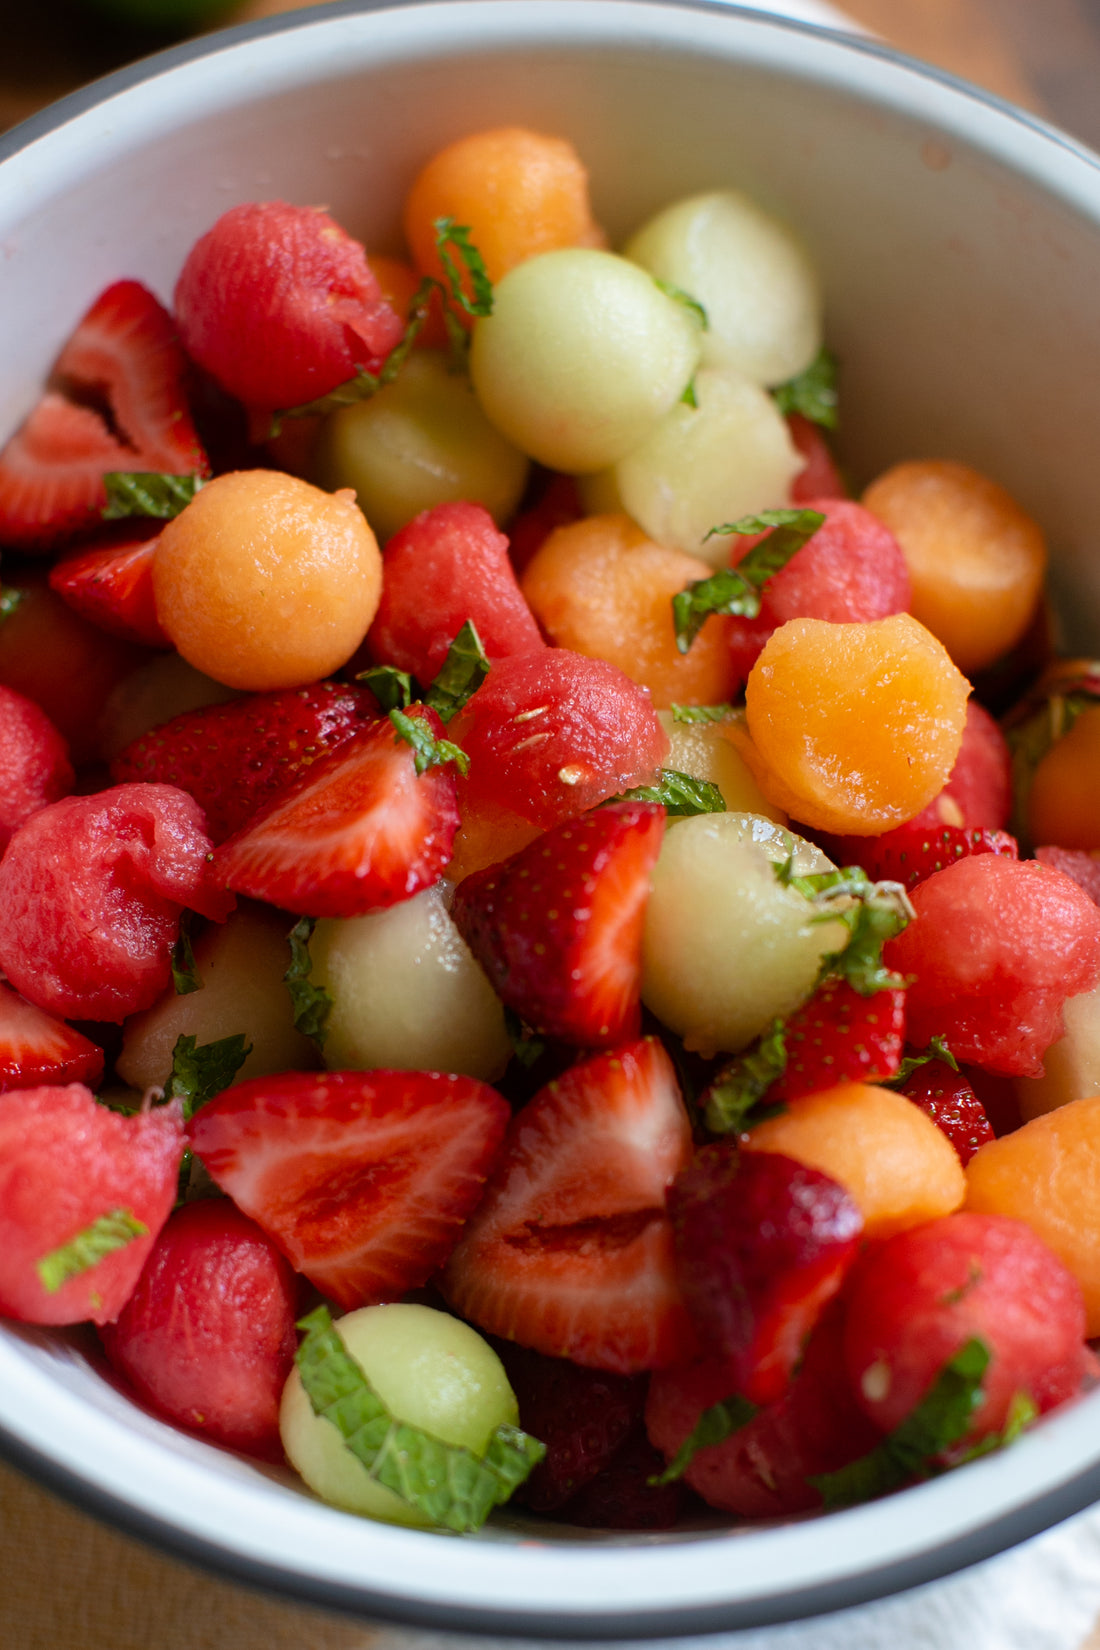 Melon + Strawberry Salad with Mint + Lime